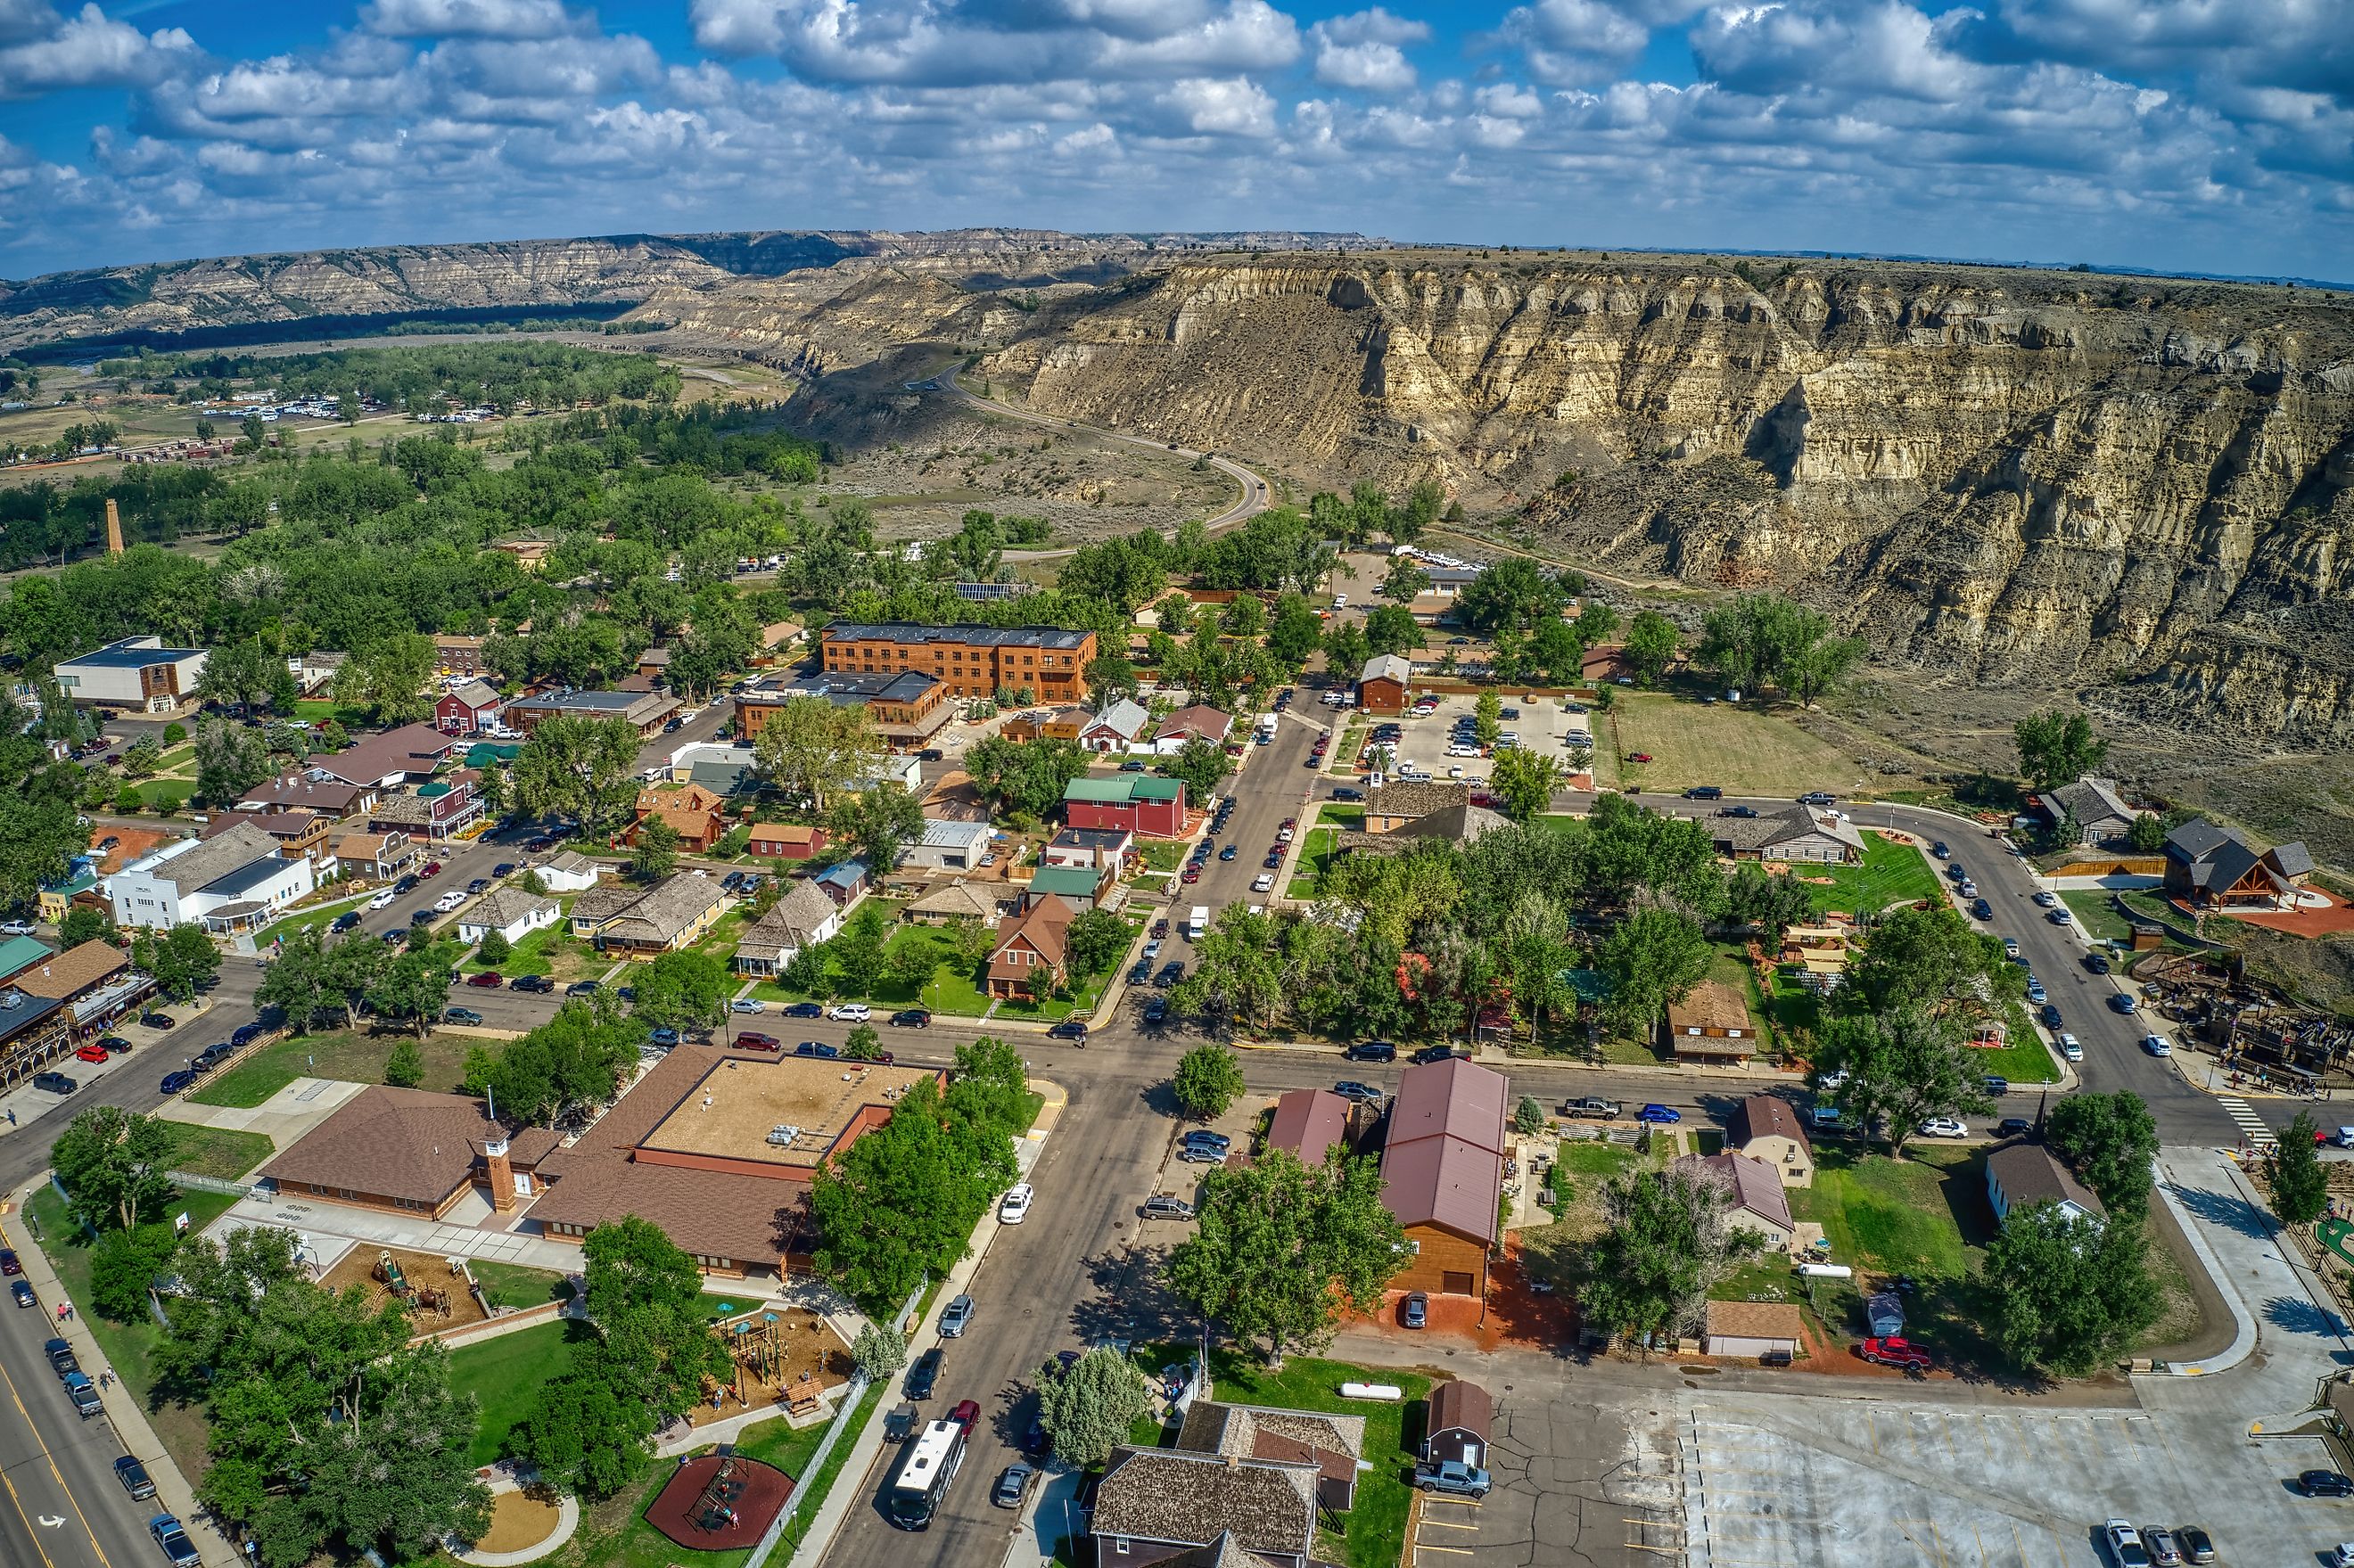 An aerial view of the tourist town of Medora, situated just outside Theodore Roosevelt National Park.